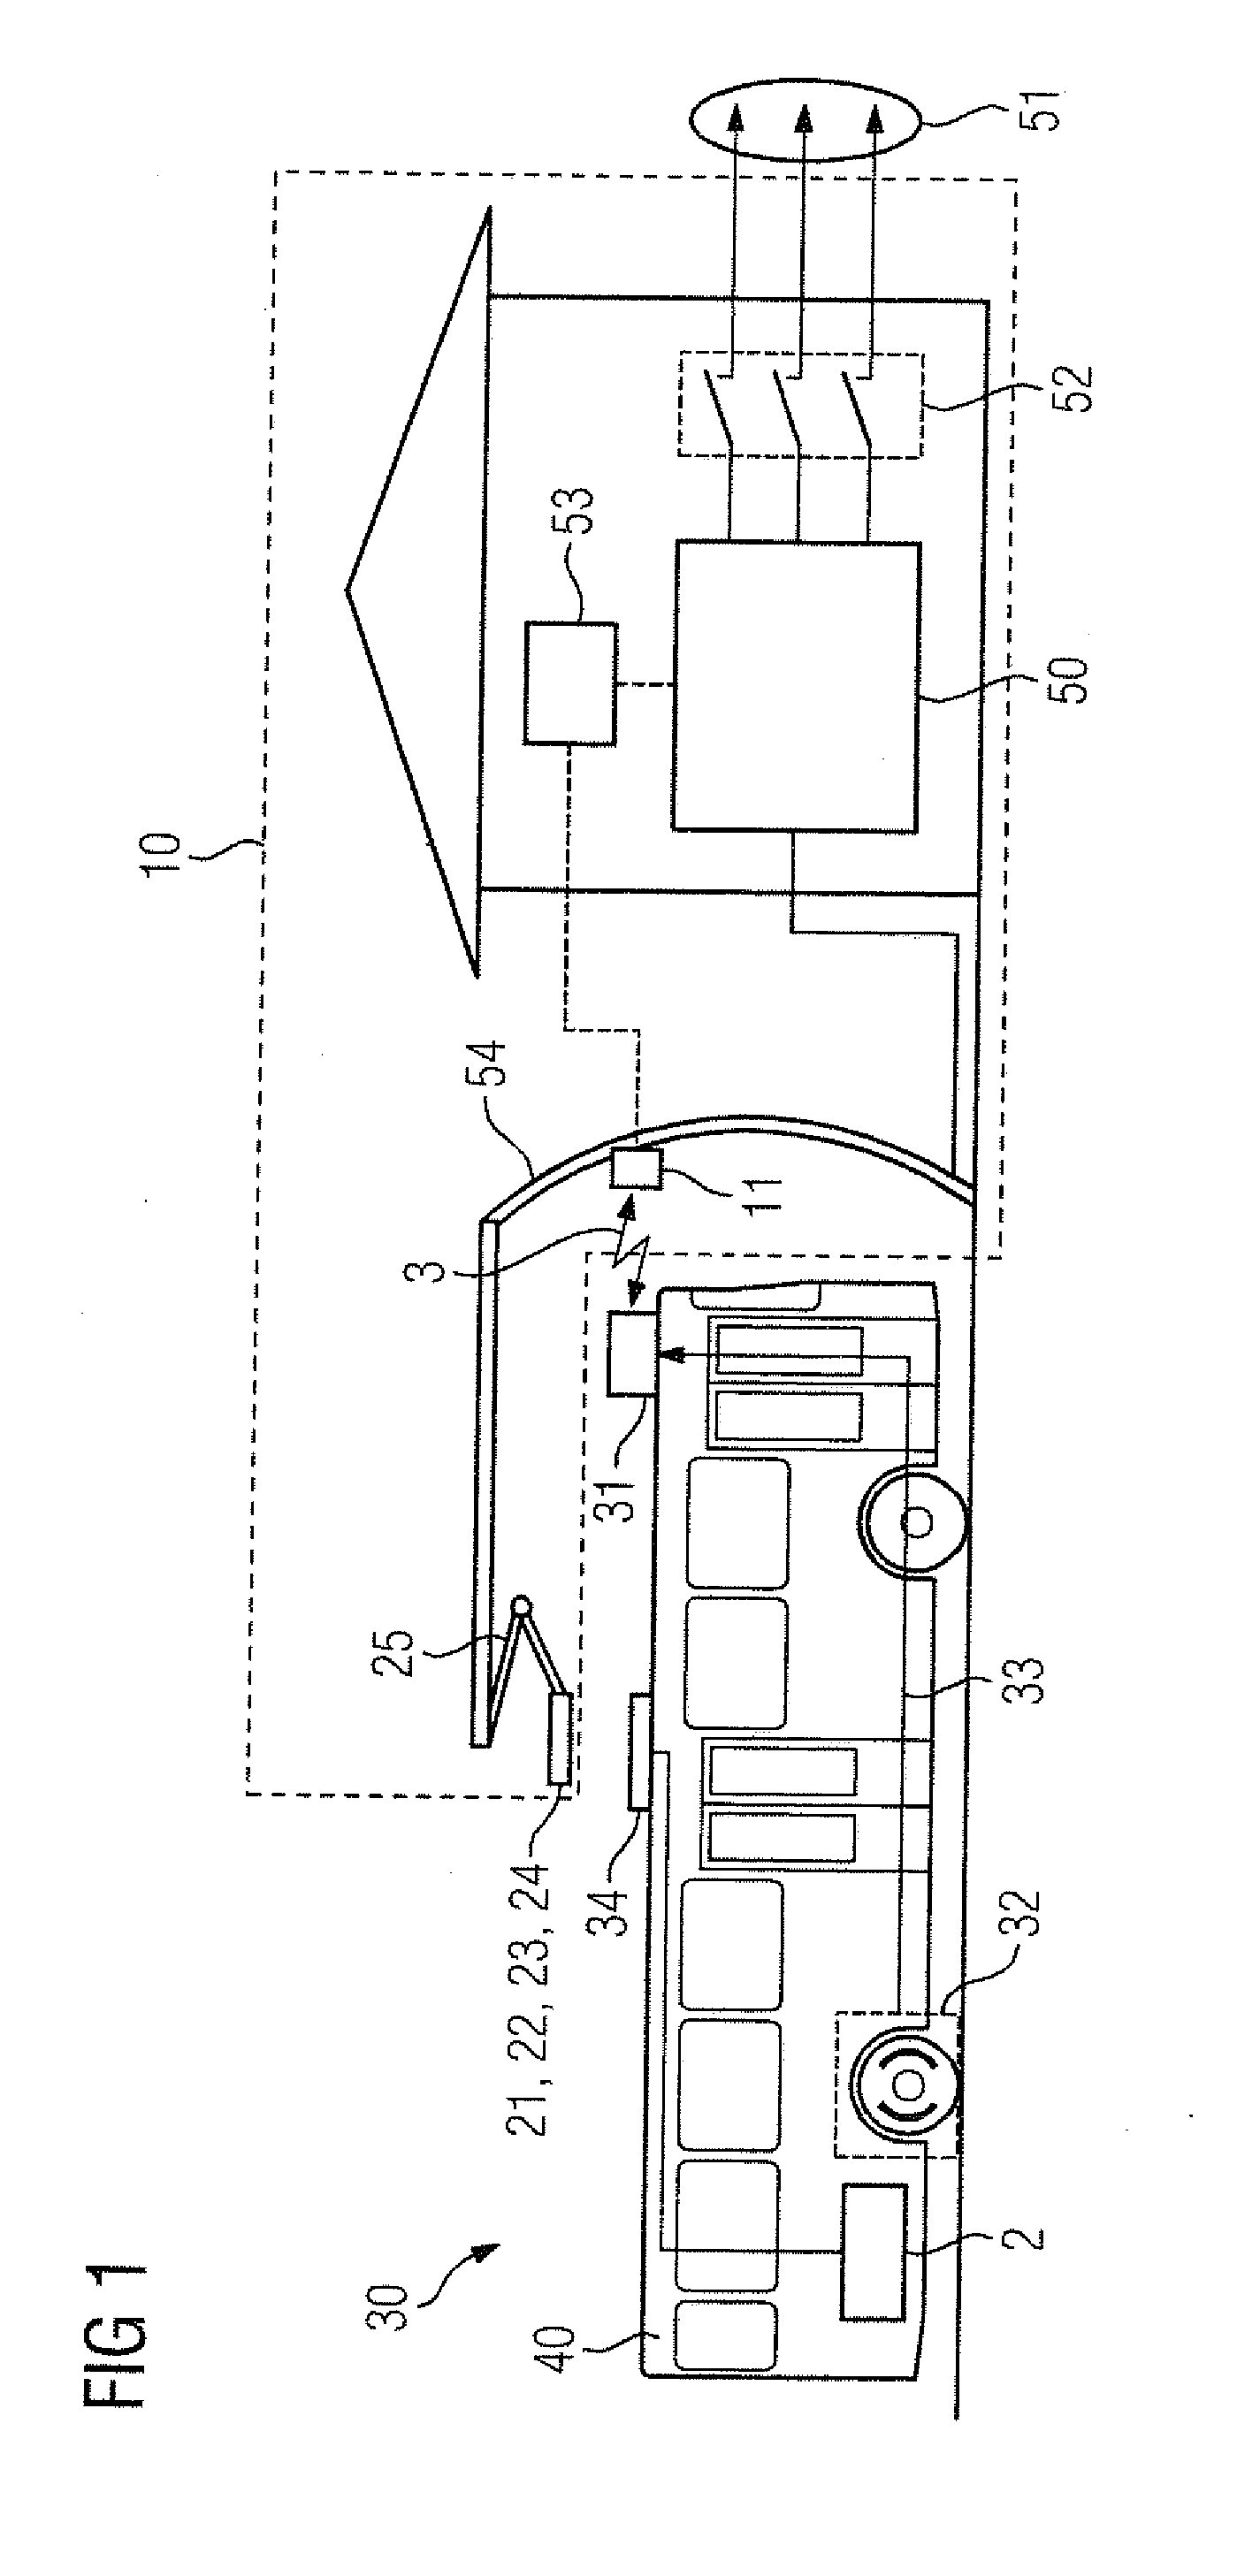 Charging method for an energy accumulator of a vehicle